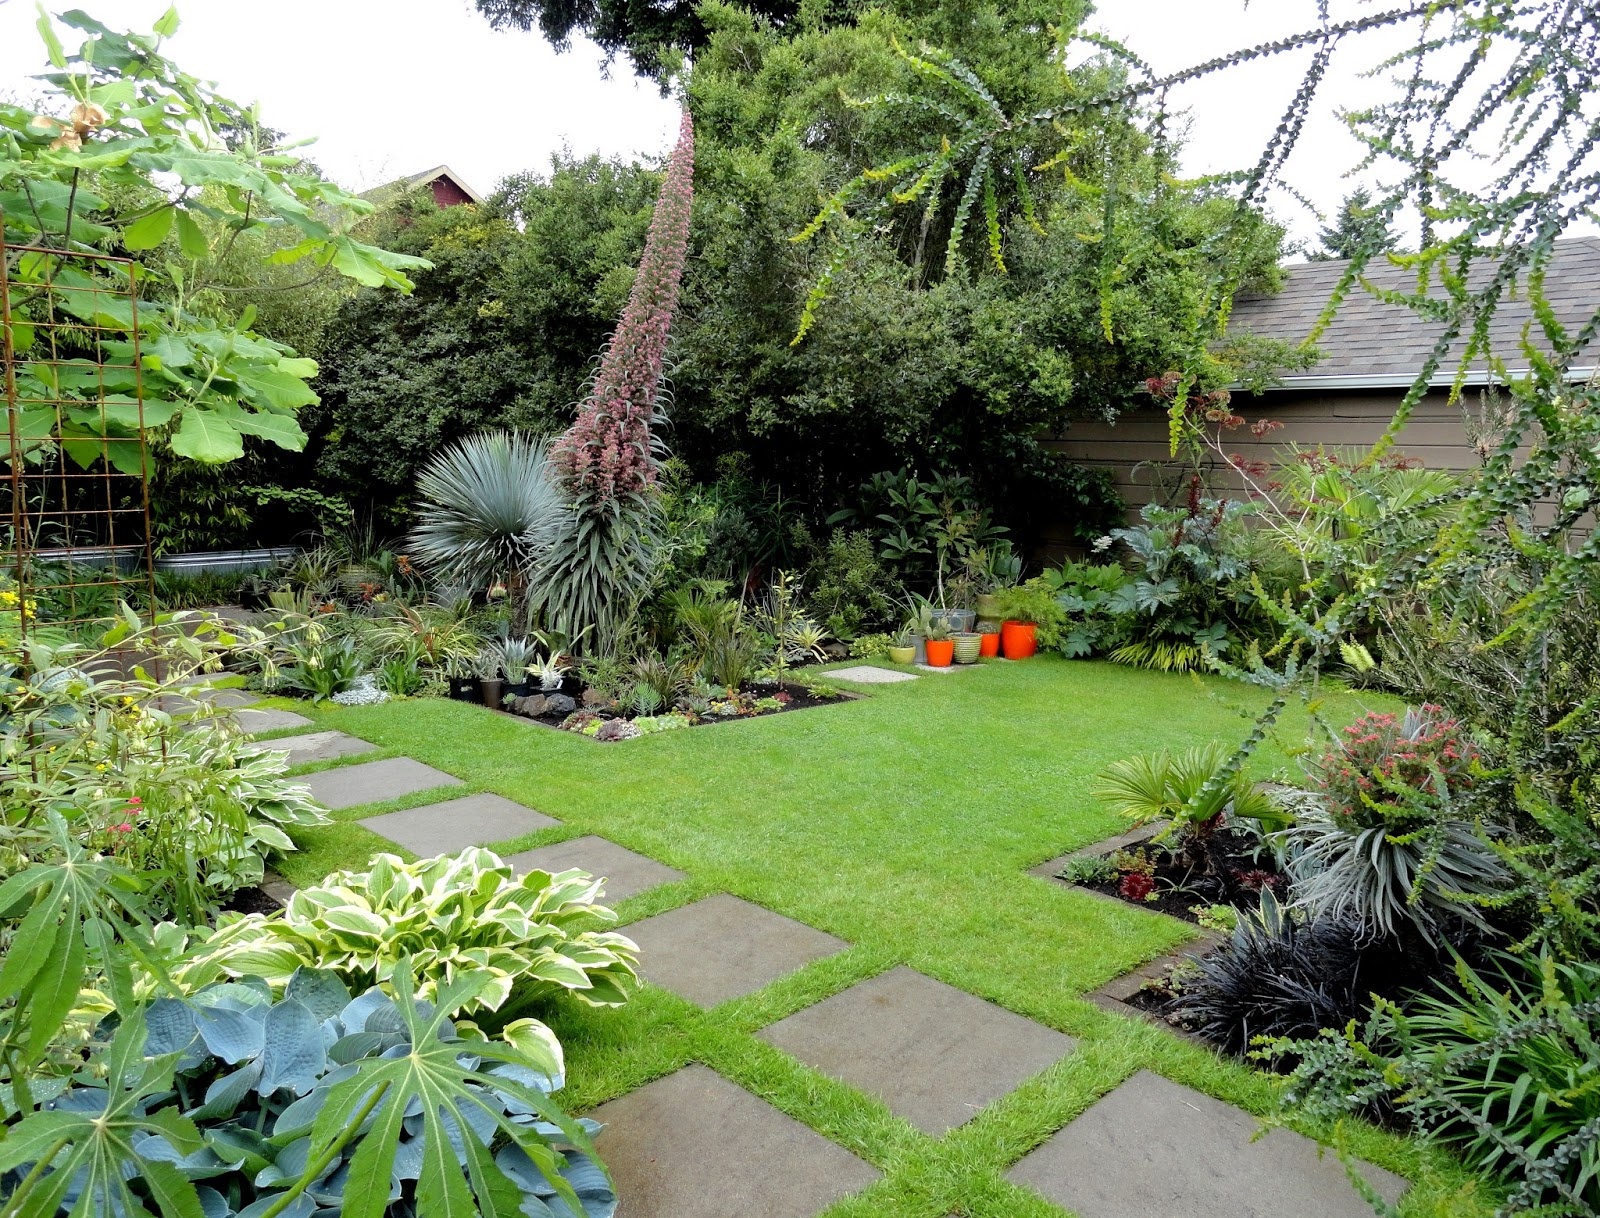 danger garden: Yes as a matter of fact I did get rid of some lawn…